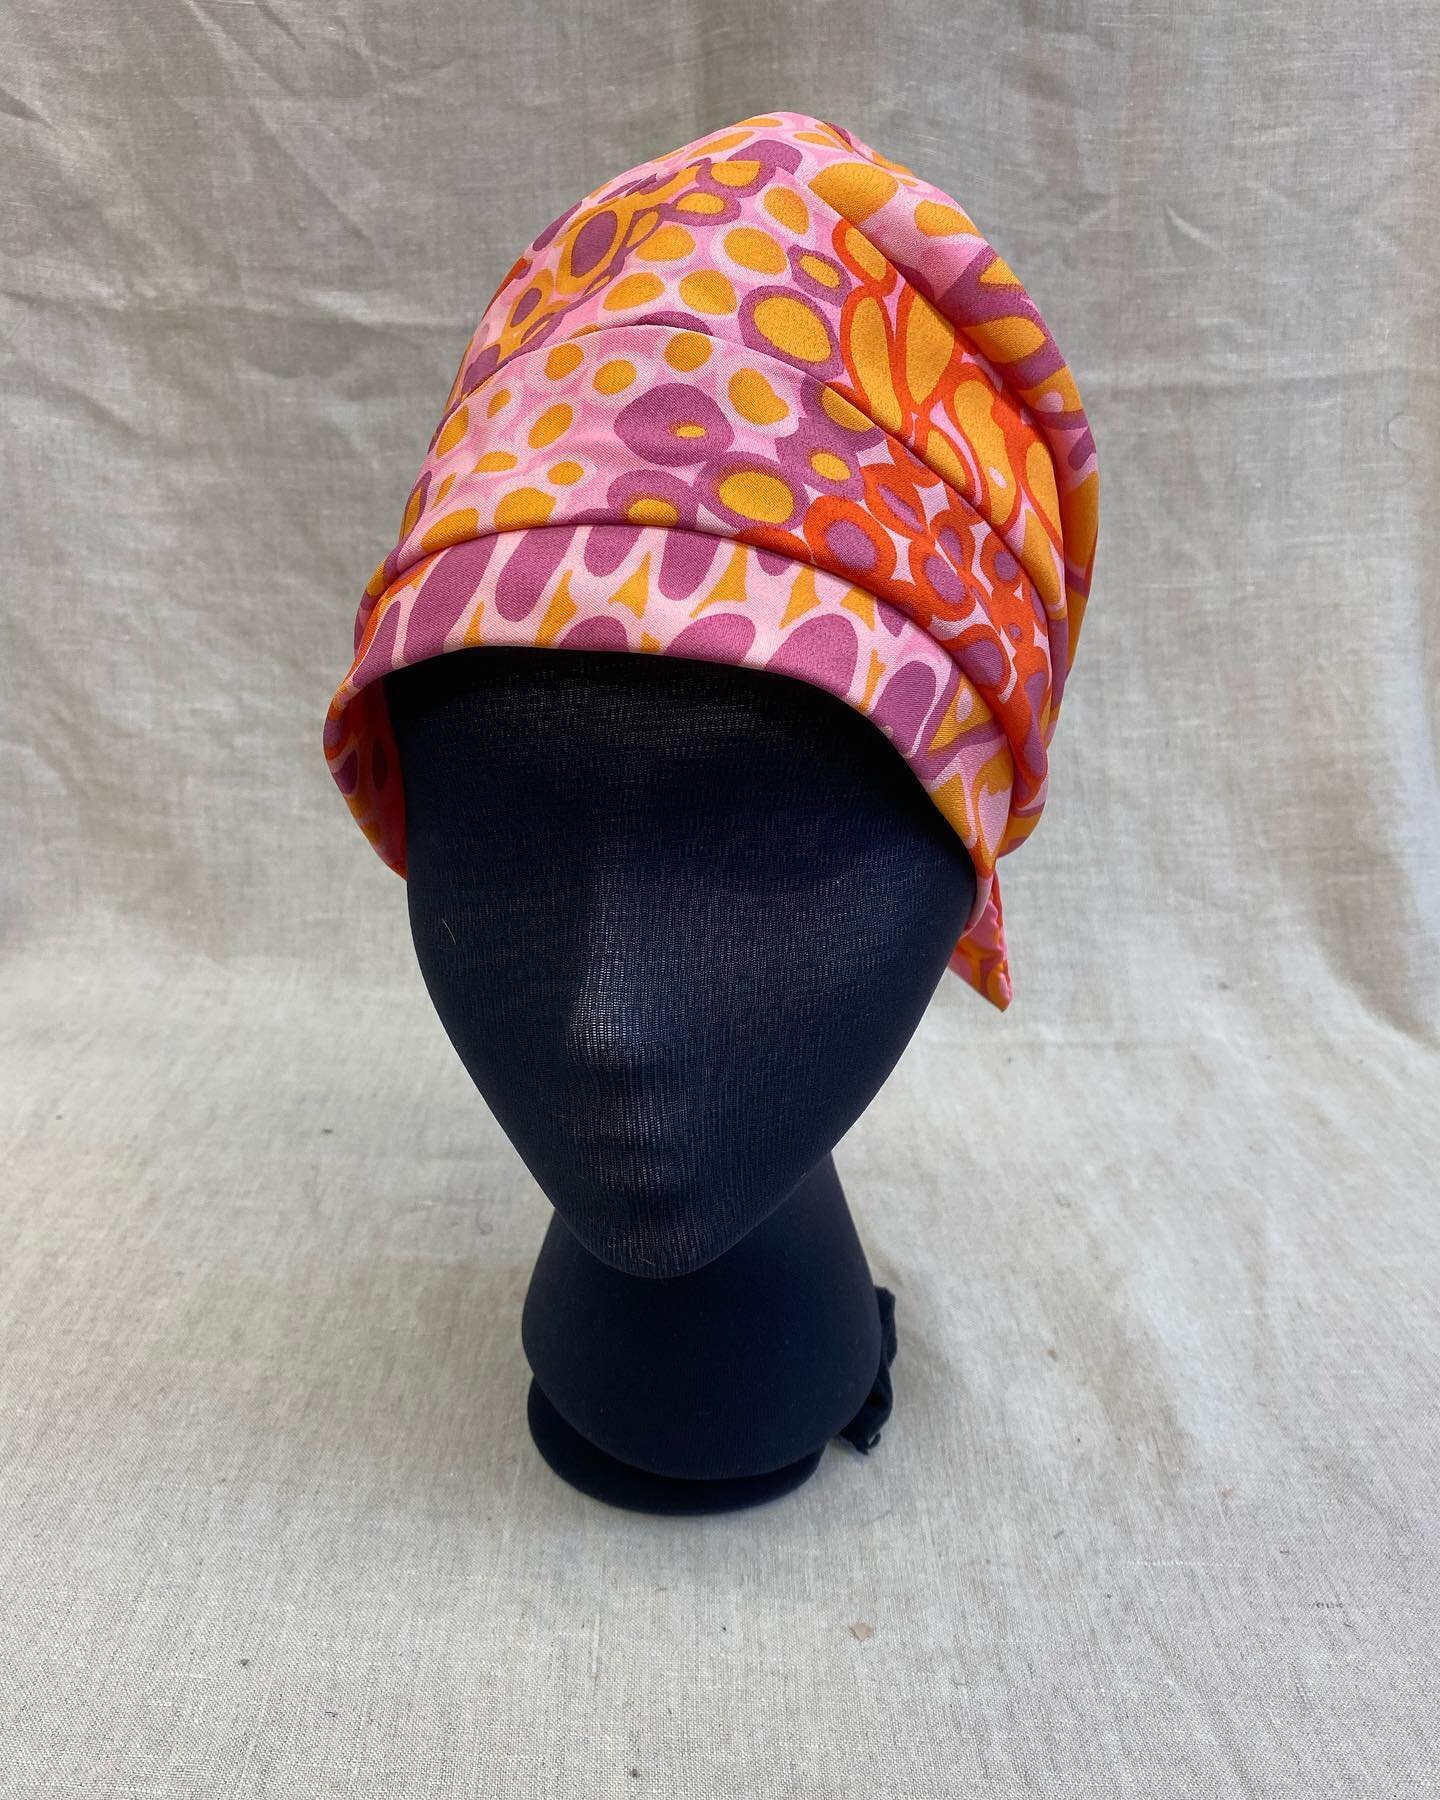 This sassy 1970&rsquo;s turban just screams the height of summer clothing chic. It is built of several strips of fabric sewn together to create the wrapped look. The turban also has elastic in the back to keep it snuggly in place! Turbans were worn b